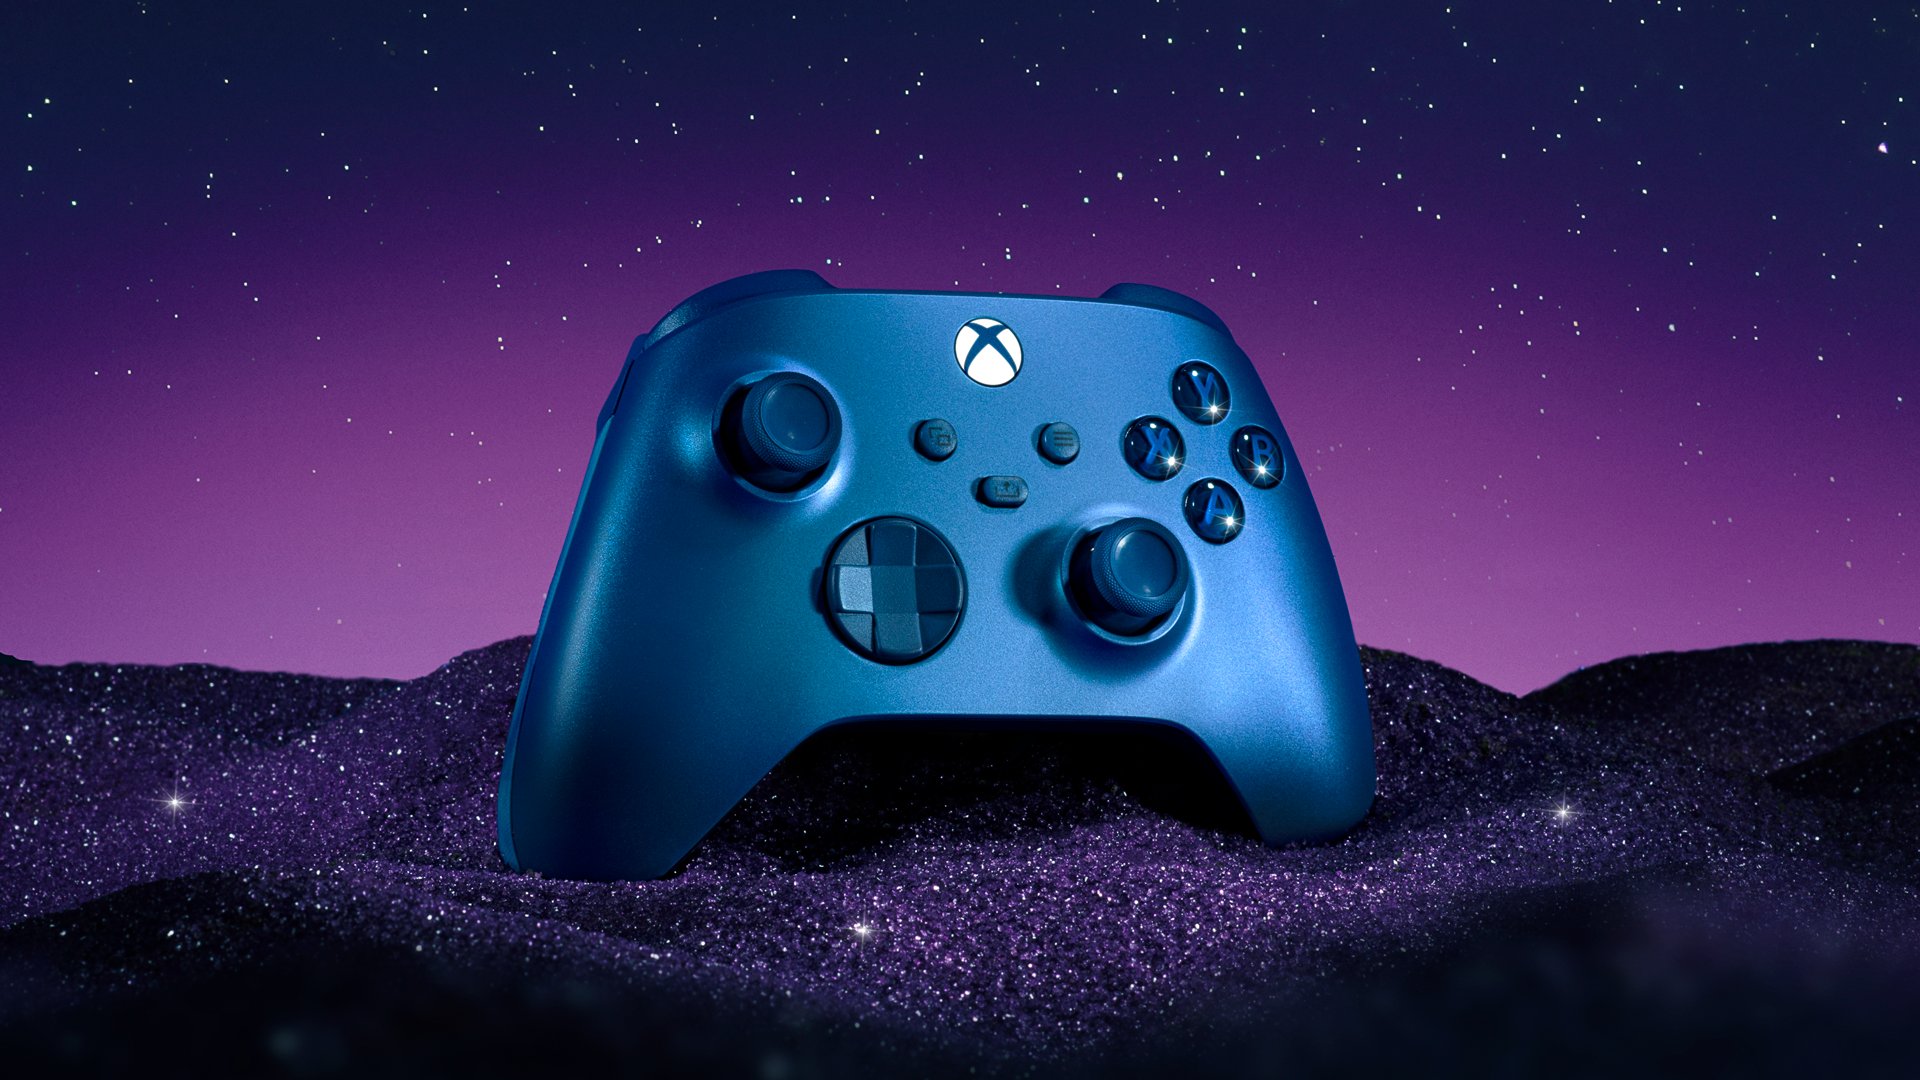 This Aqua Shift Special Edition blue Xbox controller look gorgeous